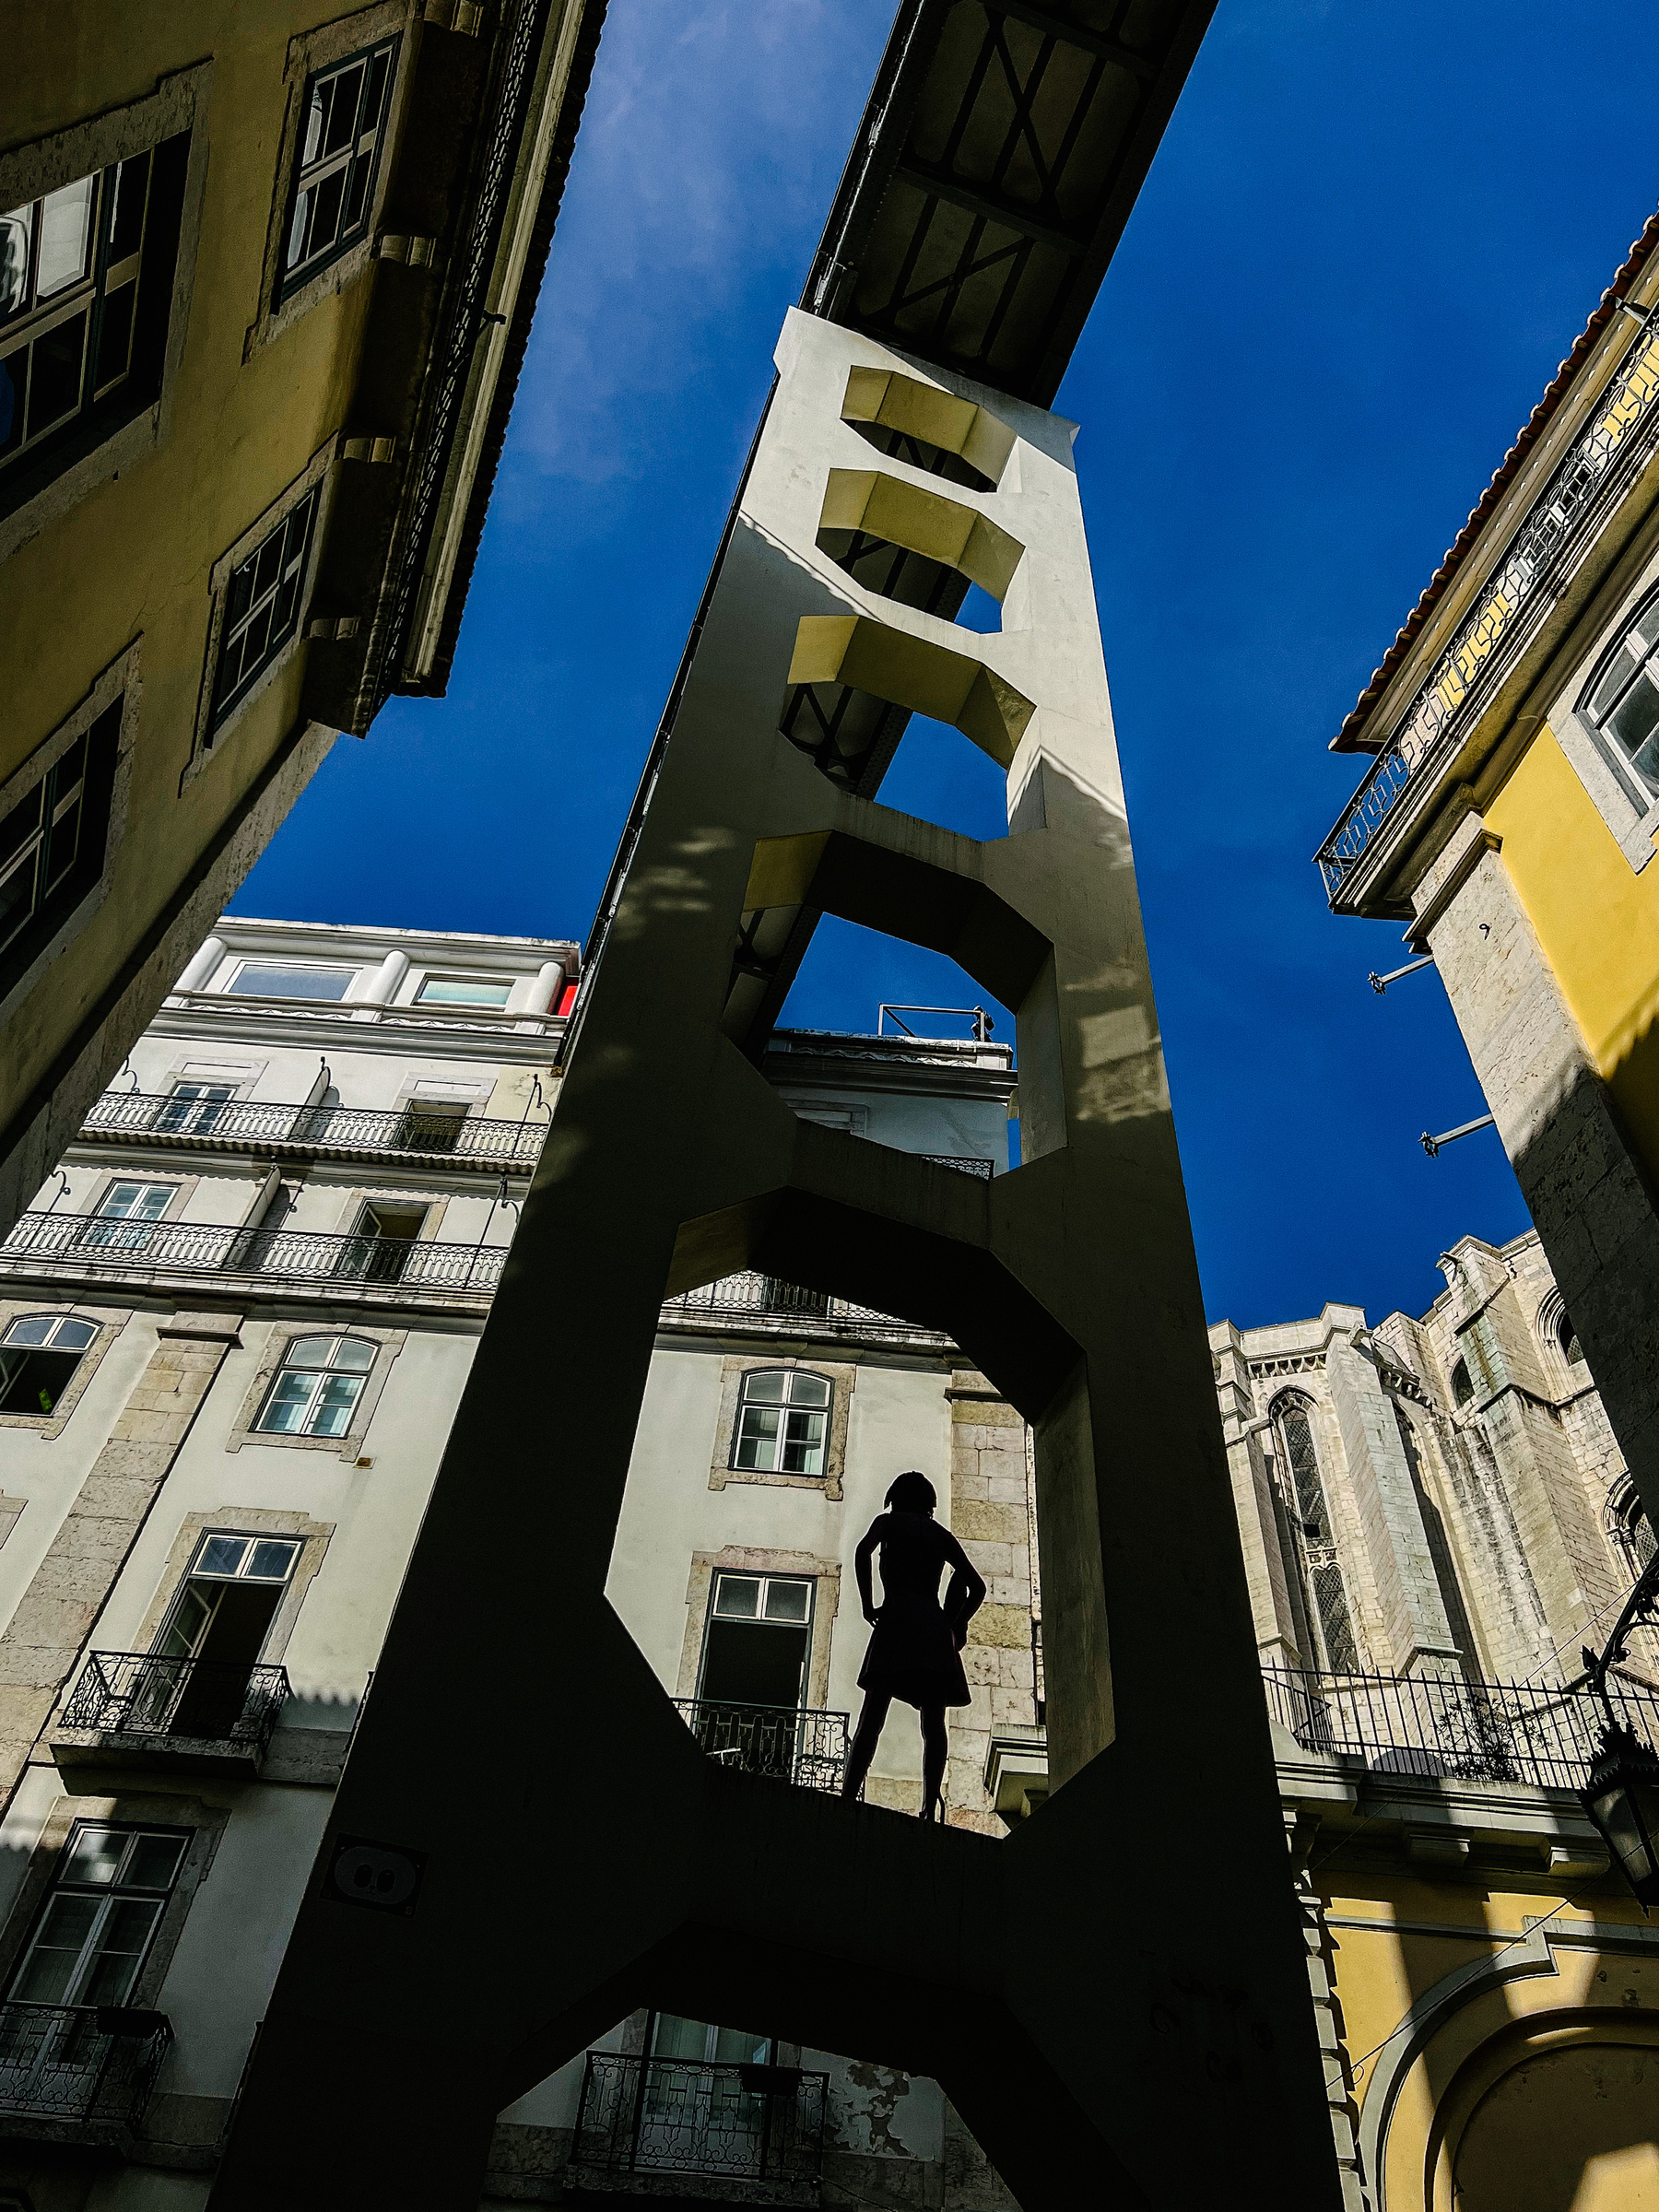 Looking up into an old part of town, a street art mannequin is seen, backlit